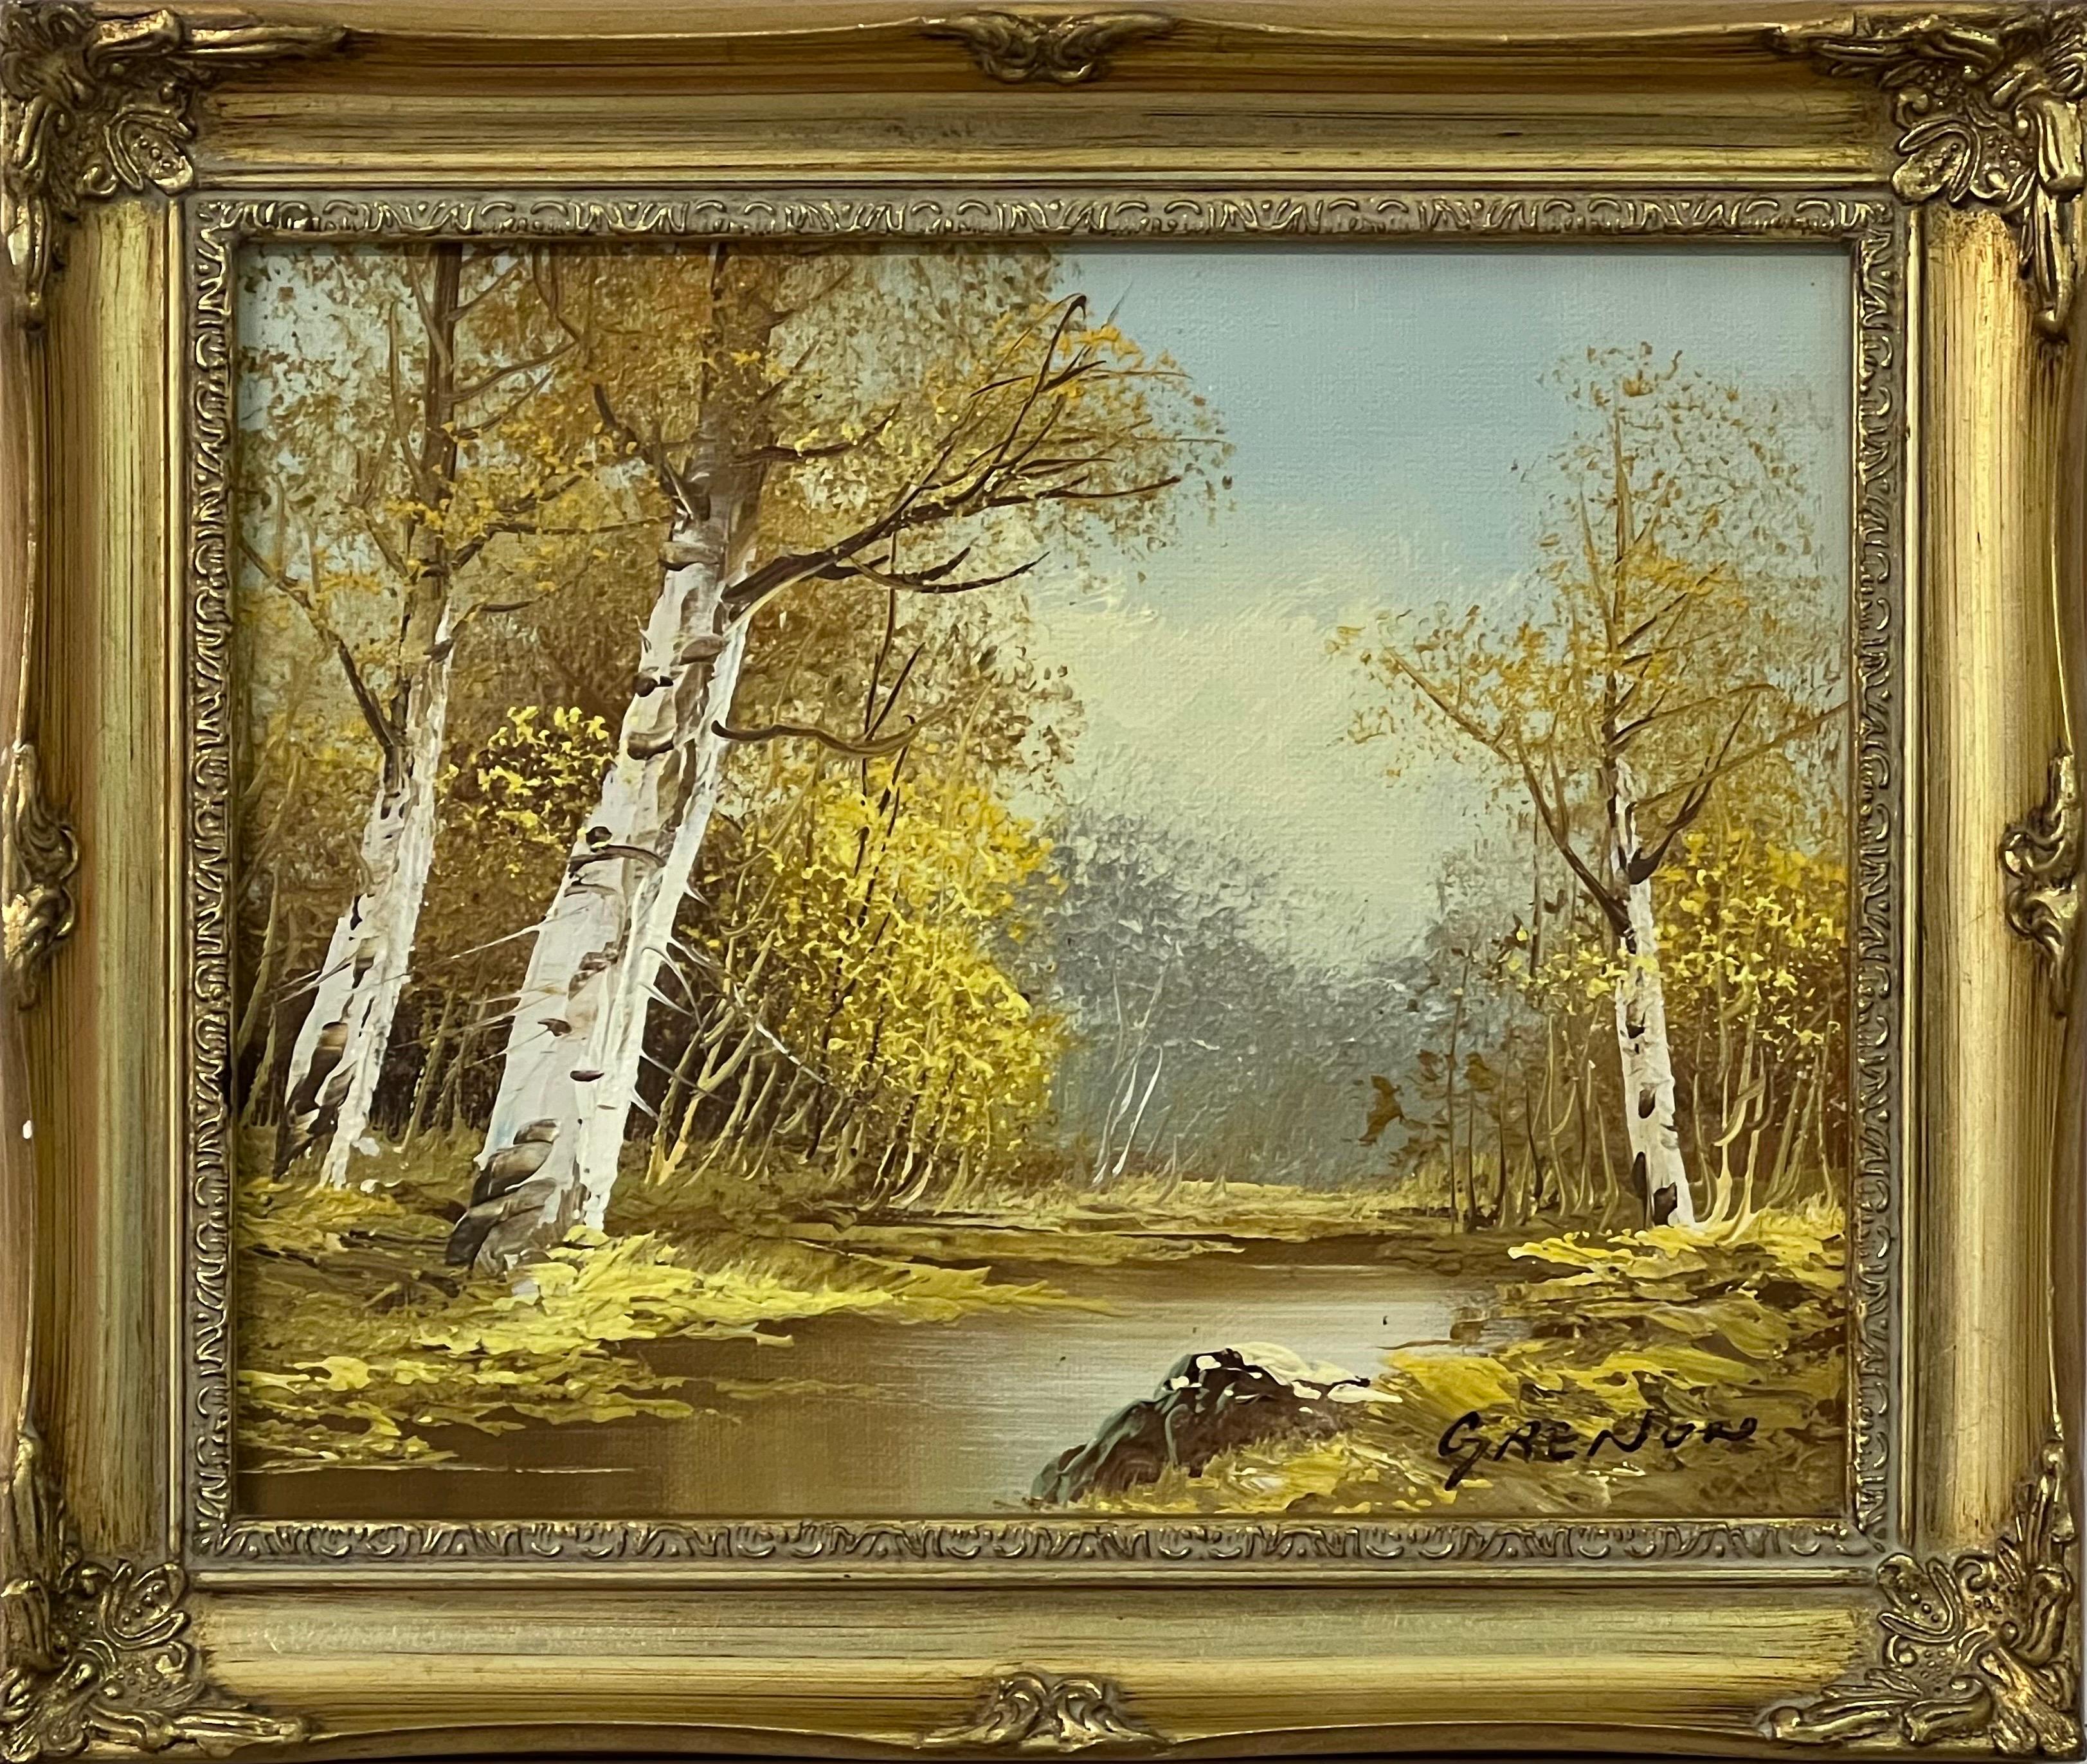 Grenon Figurative Painting - Vintage 20th Century Oil Painting of a River Landscape with Silver Birch Trees